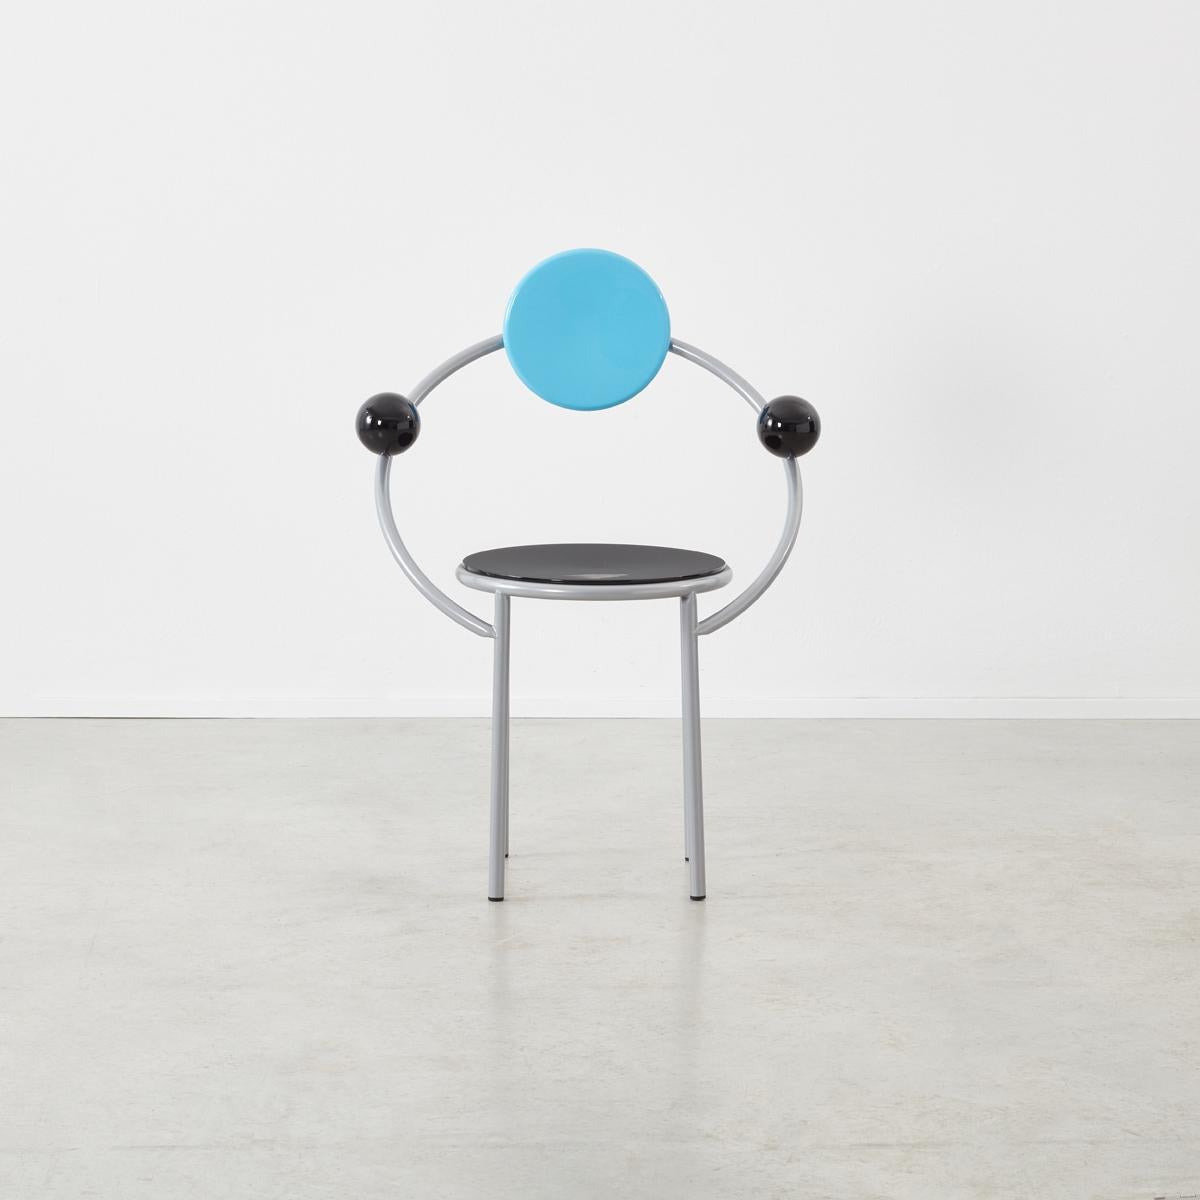 Modern Michele De Lucchi ‘First’ Chair, Memphis Milano, Italy 1983